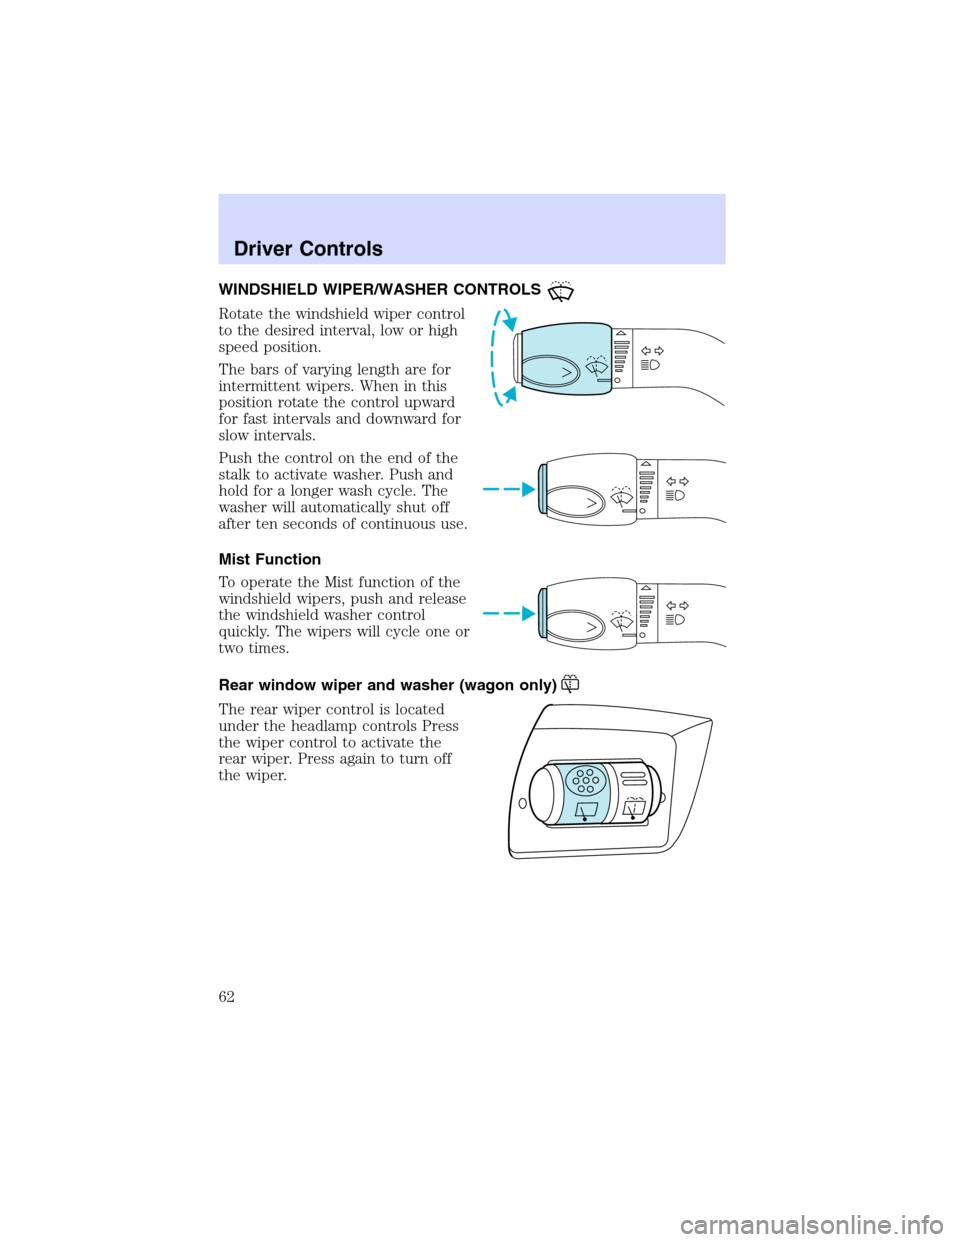 Mercury Sable 2002  s User Guide WINDSHIELD WIPER/WASHER CONTROLS
Rotate the windshield wiper control
to the desired interval, low or high
speed position.
The bars of varying length are for
intermittent wipers. When in this
position 